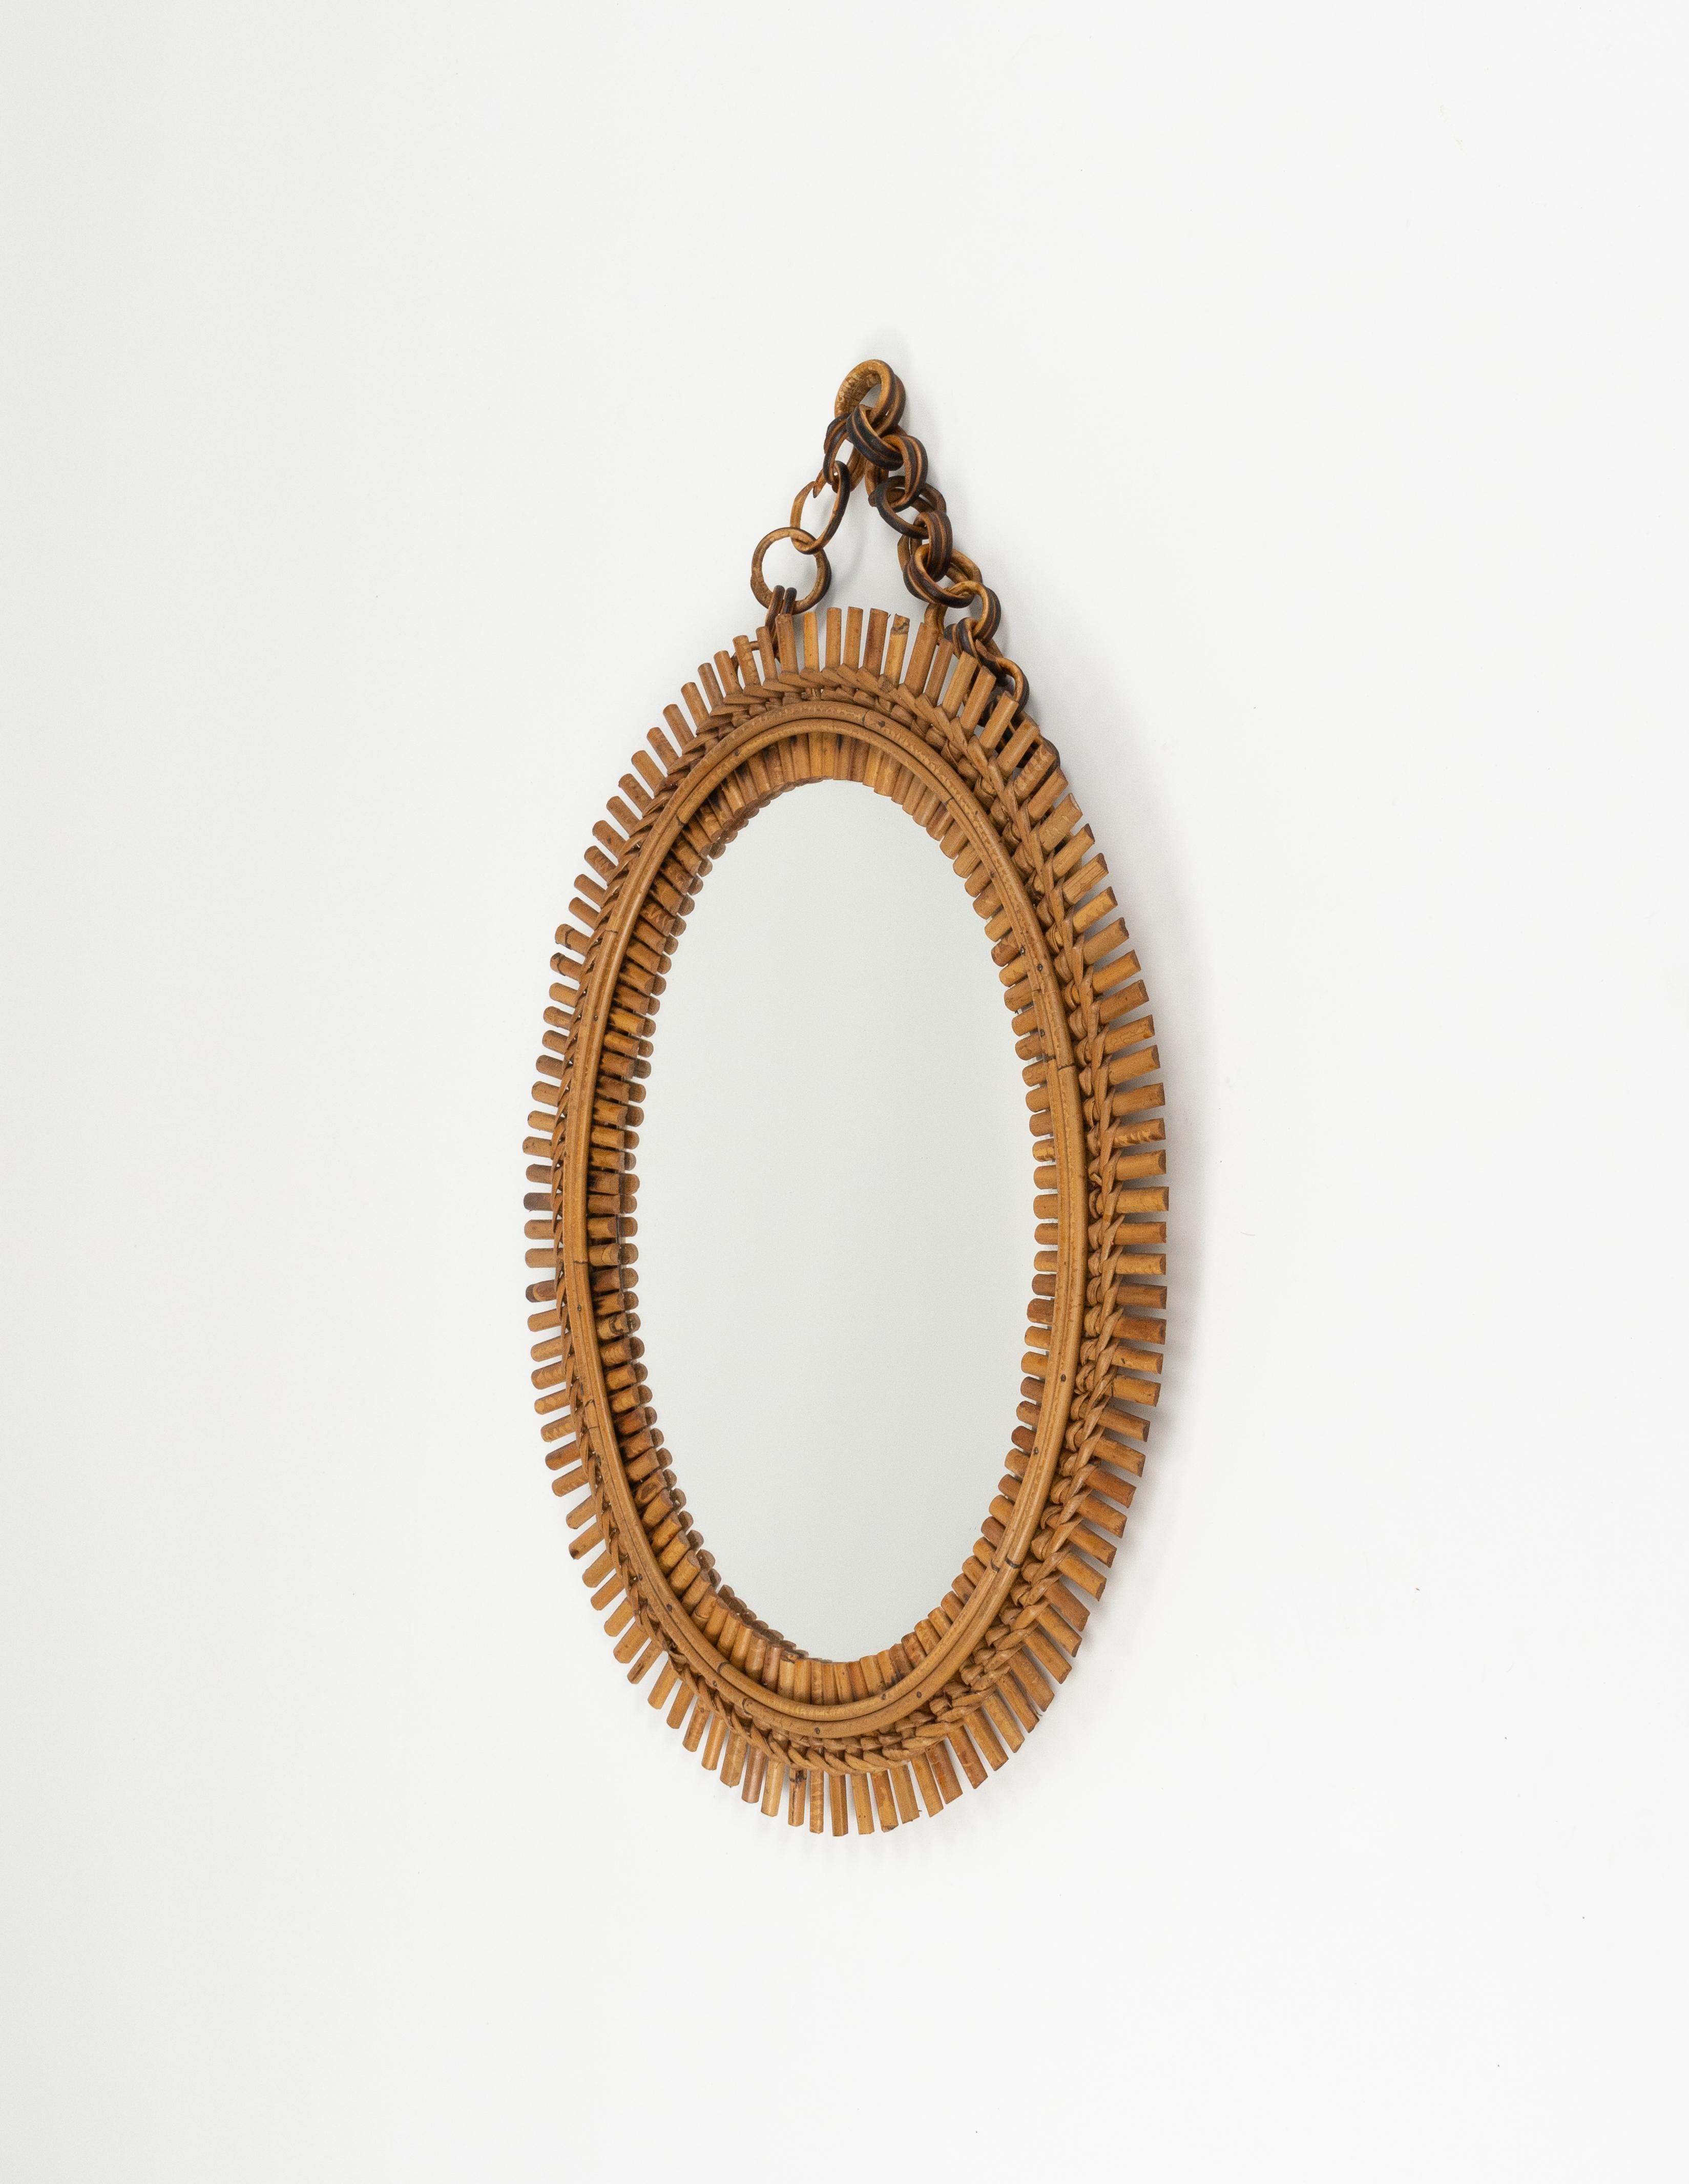 Midcentury Rattan and Bamboo Oval Wall Mirror with Chain, Italy 1960s For Sale 1